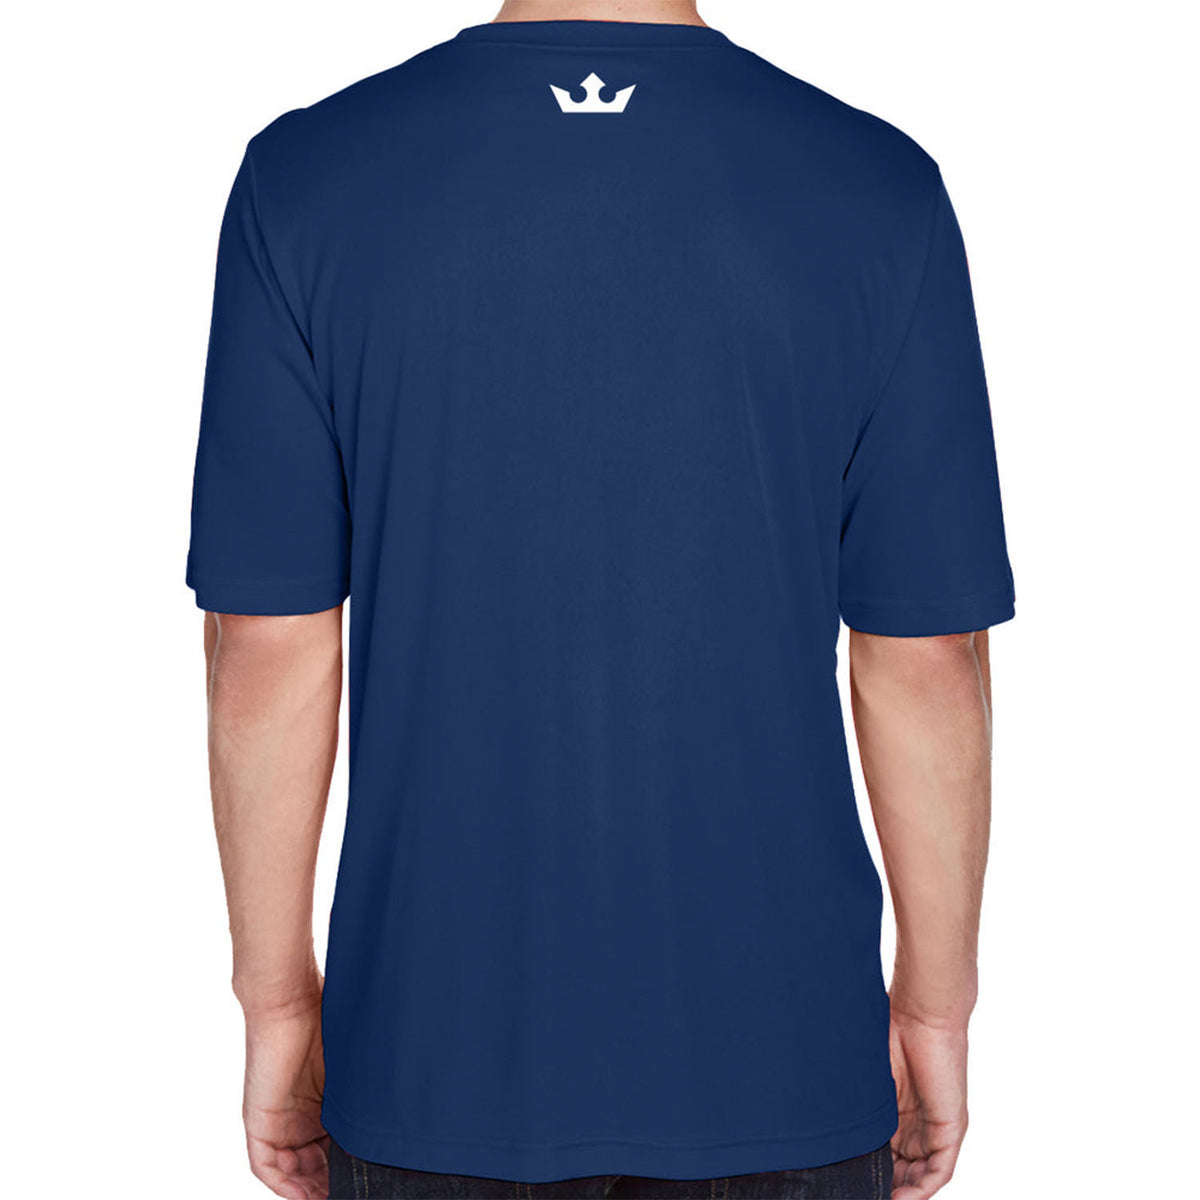 PFL Performance T-Shirt in Navy - Front View, Model Shot